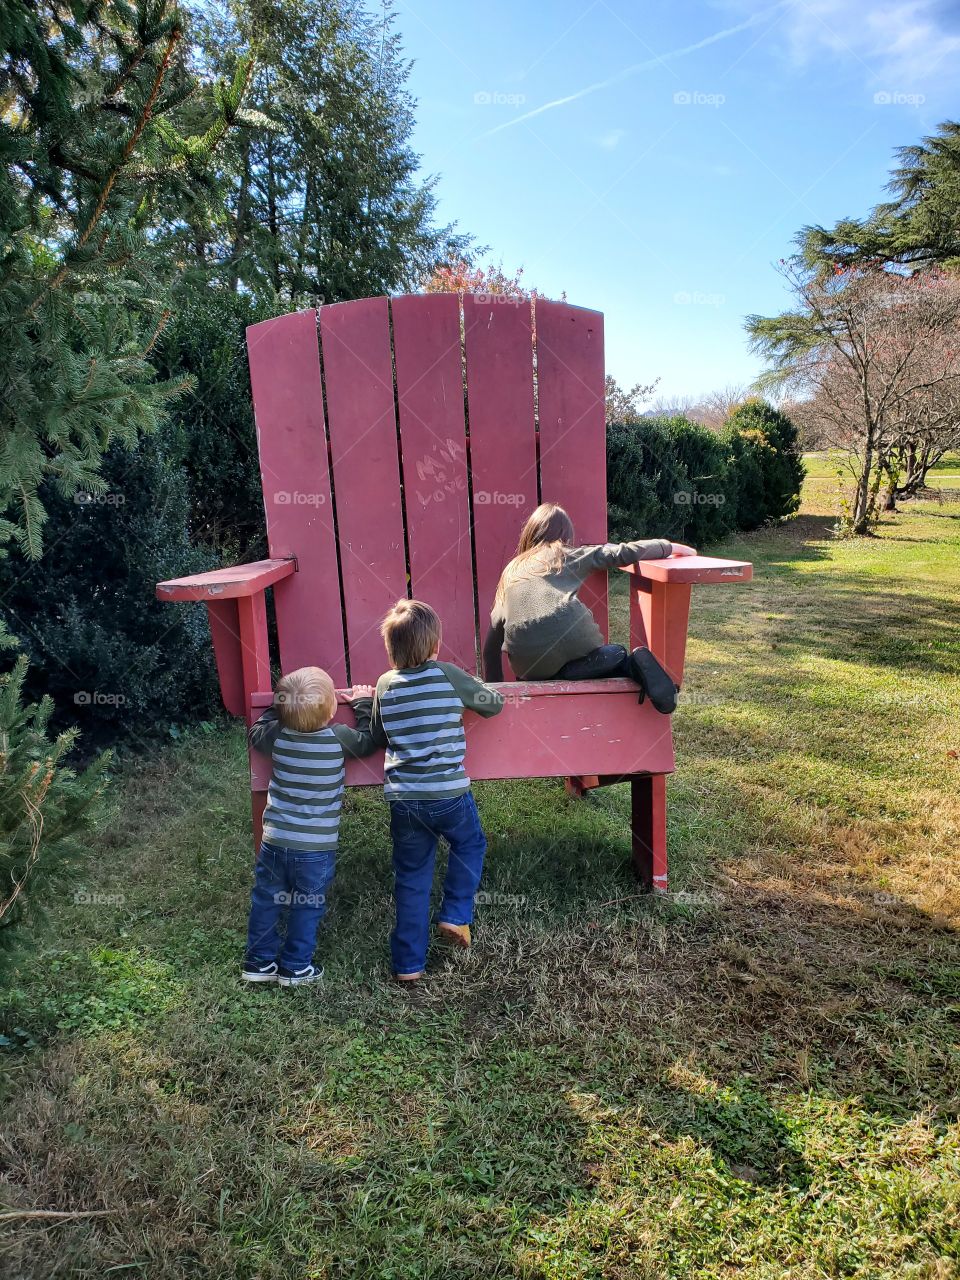 Kids and a Chair